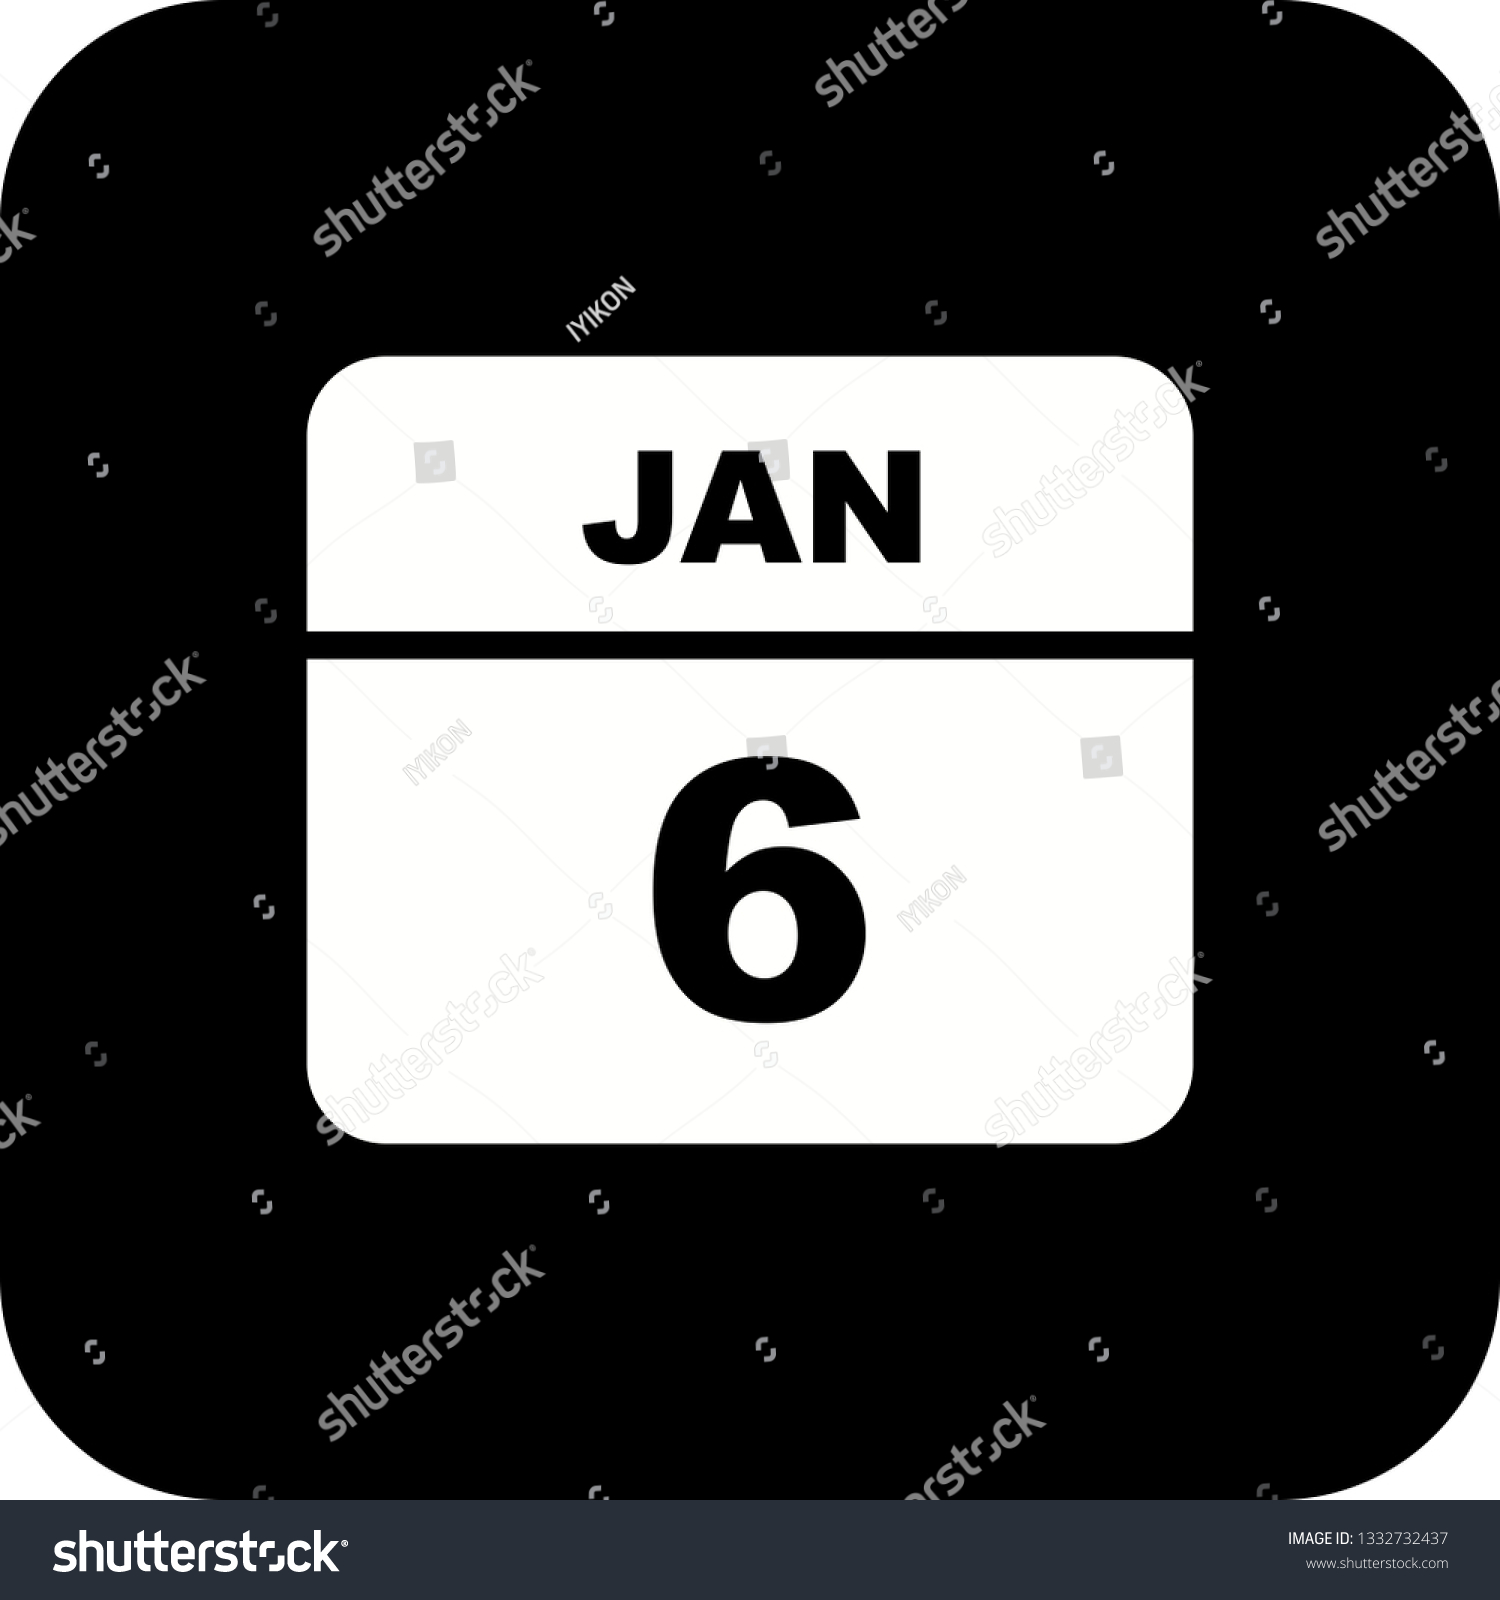 January 6th Date on a Single Day Calendar - Royalty Free Stock Vector ...